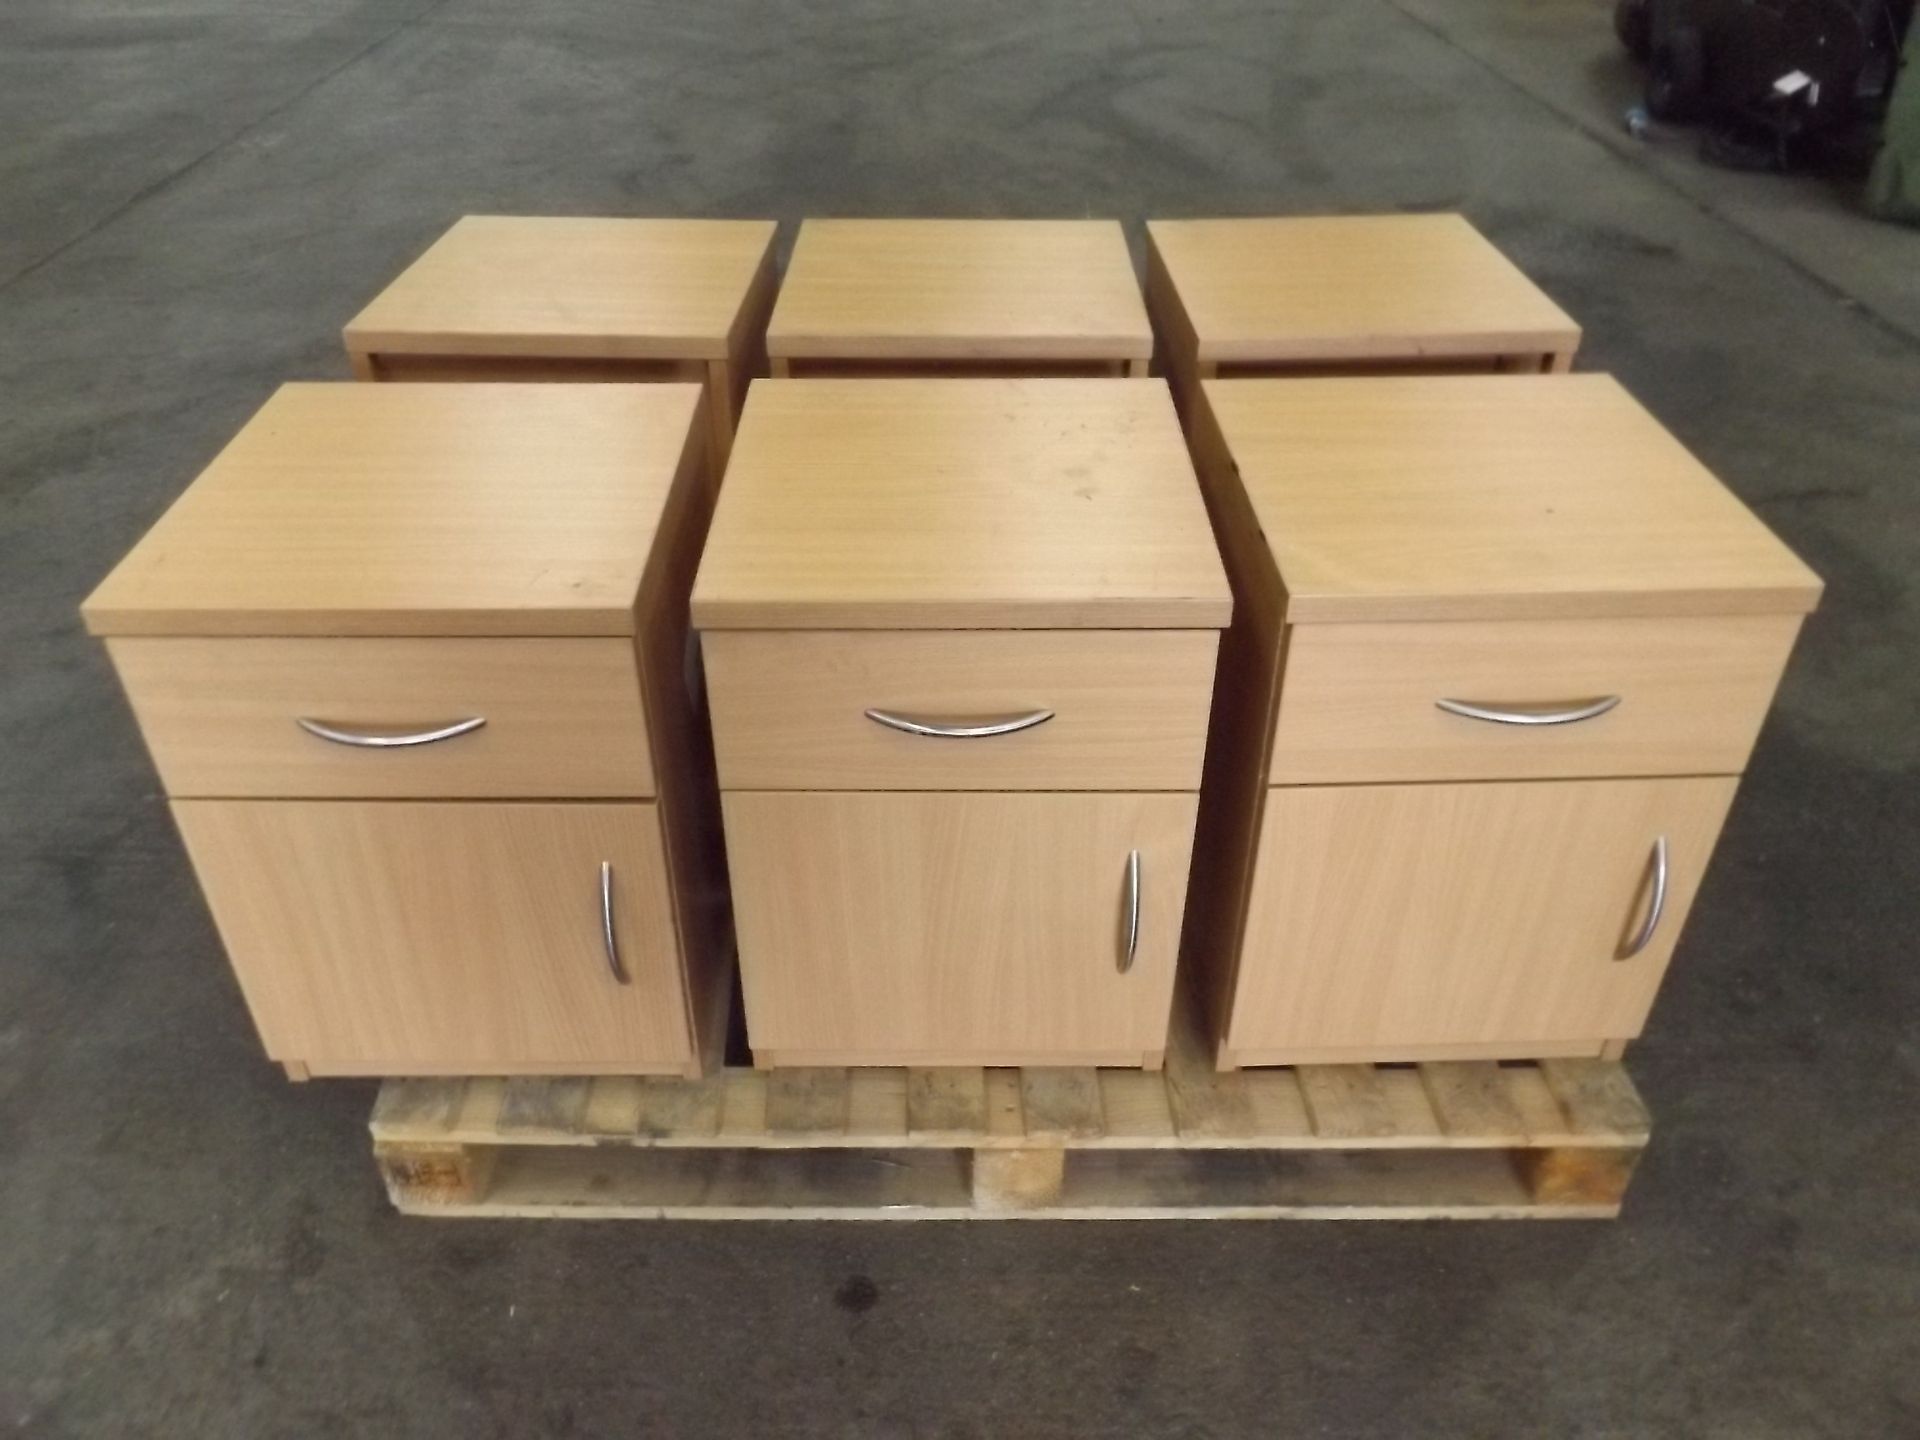 6 x Office Desk Type Cabinets